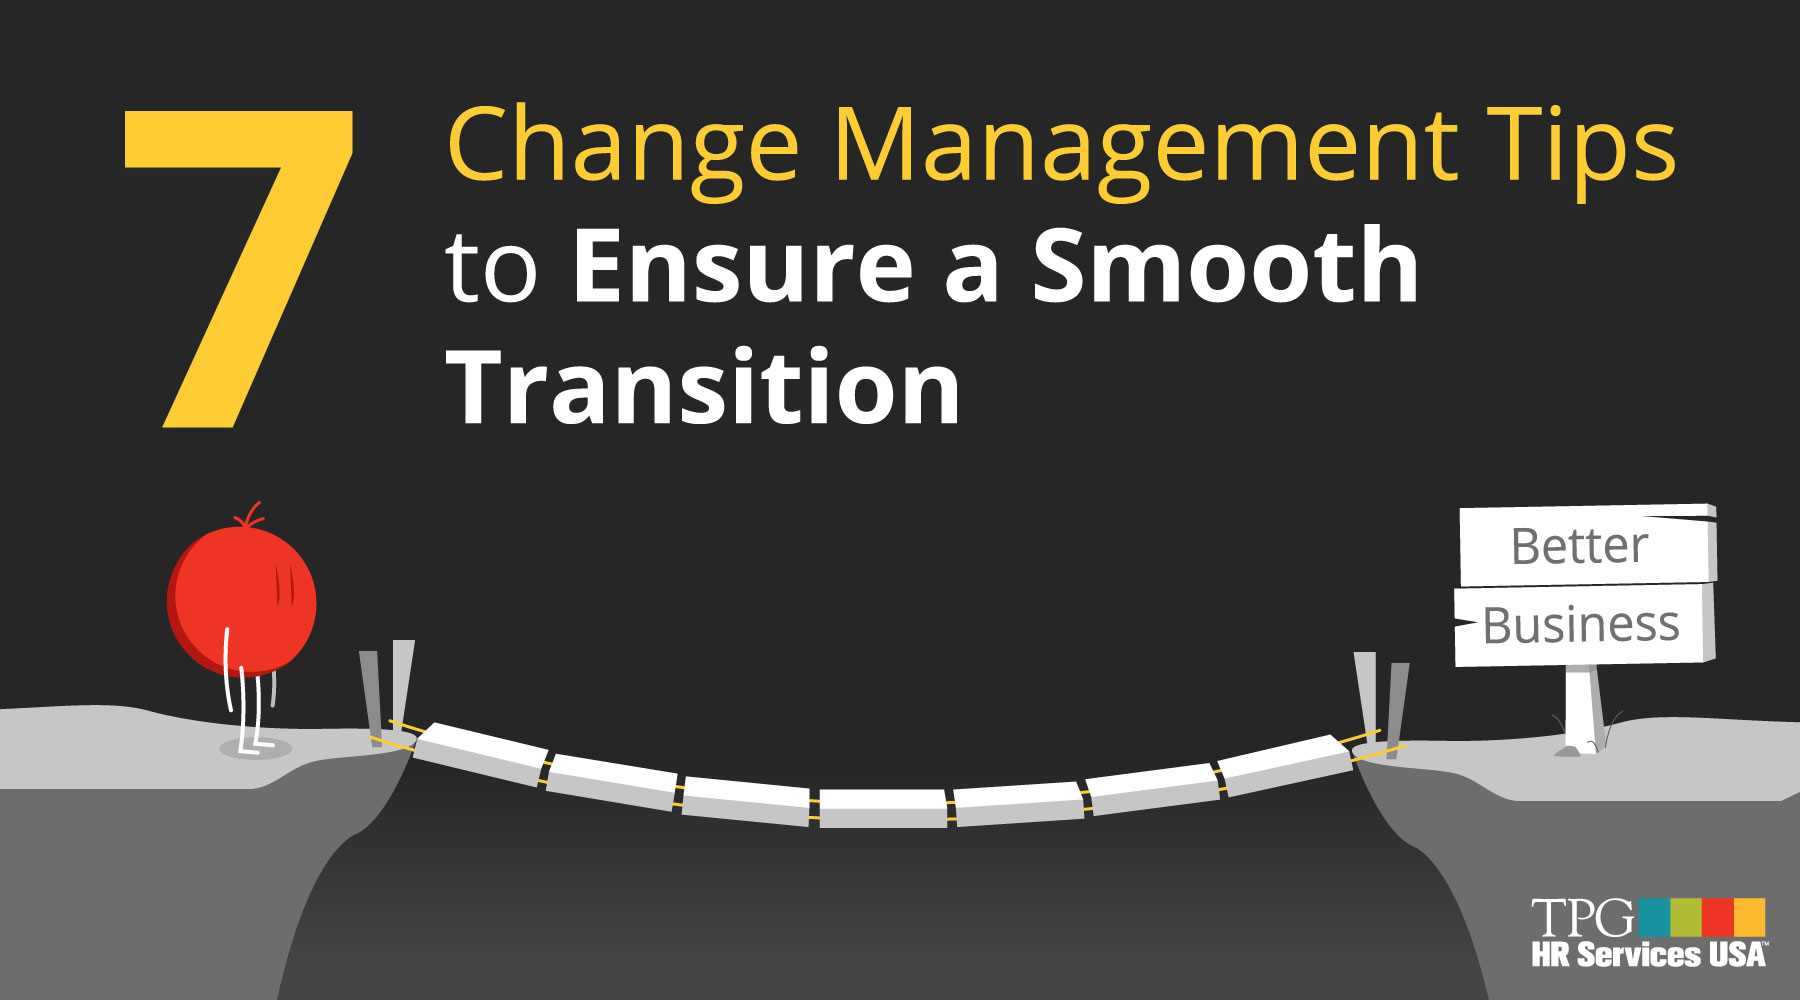 Change Management Tips for a Smooth Company Transition